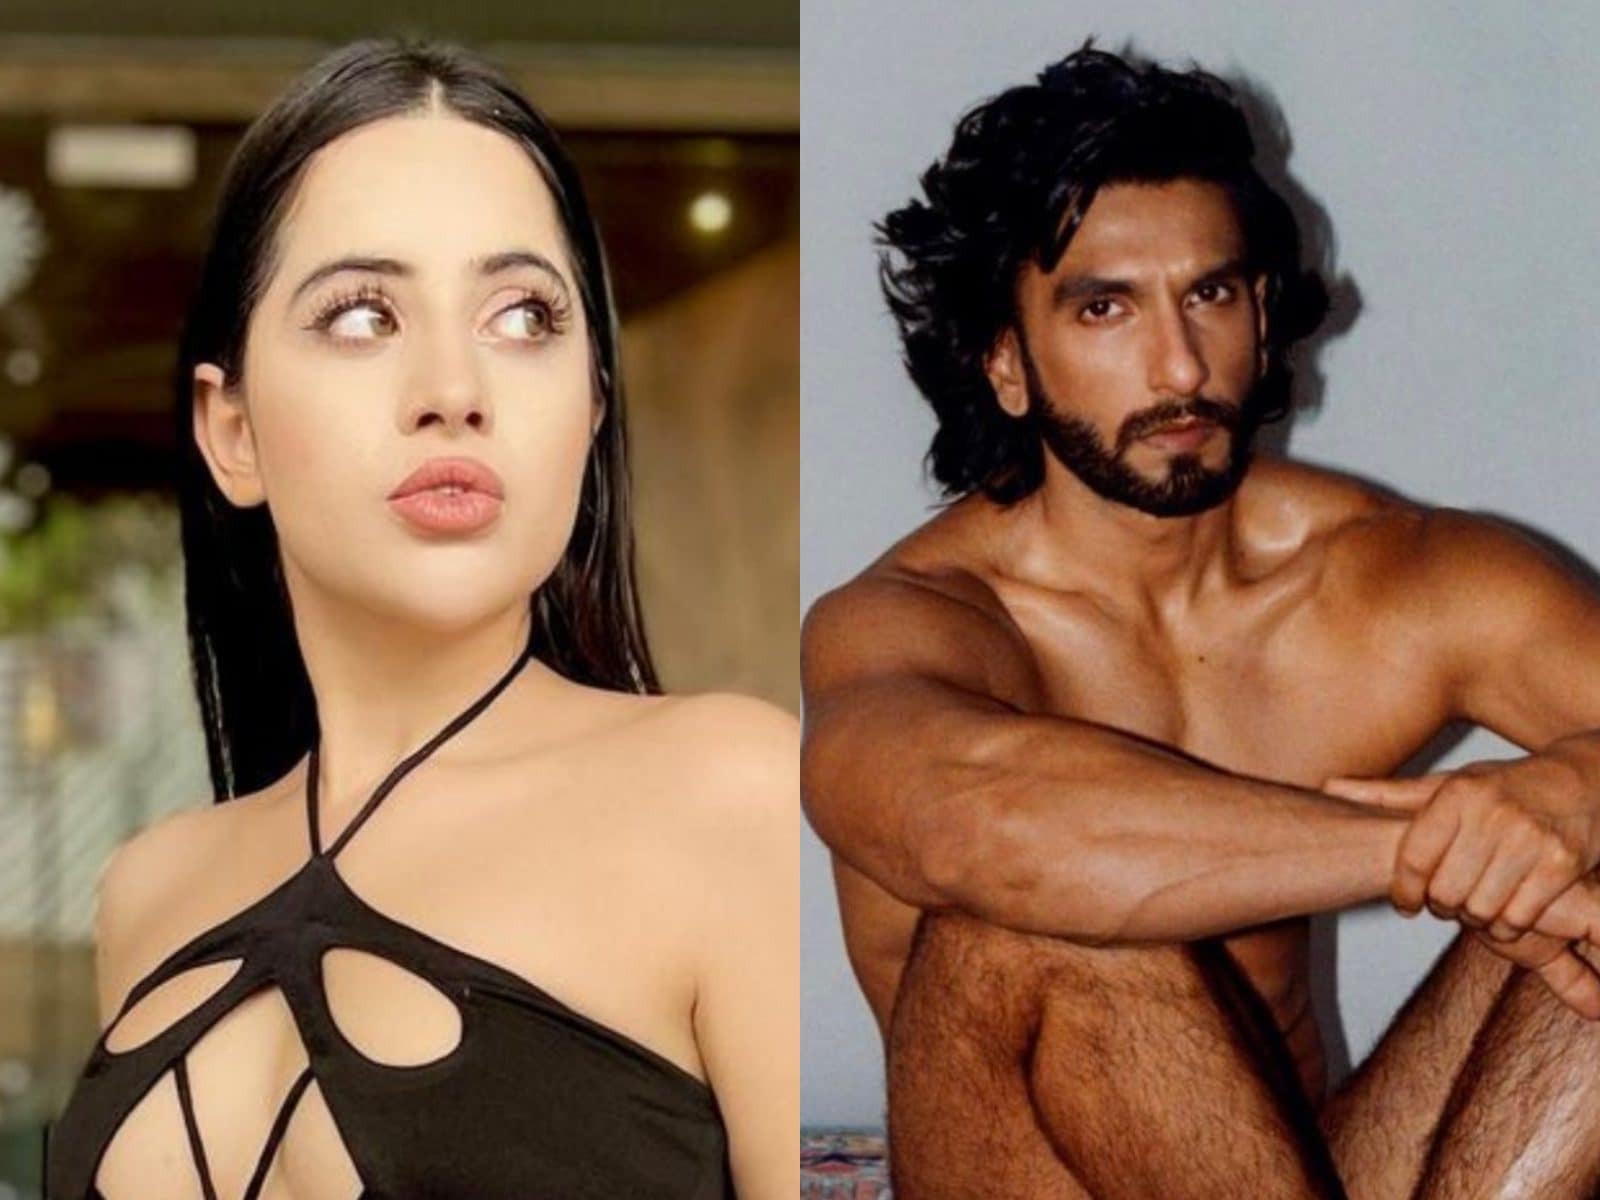 Nora Fatehi Nudes - Uorfi Javed Reacts To Ranveer Singh's Nude Pictures, Says 'Nobody's  Sentiments Have Been Hurt' - News18